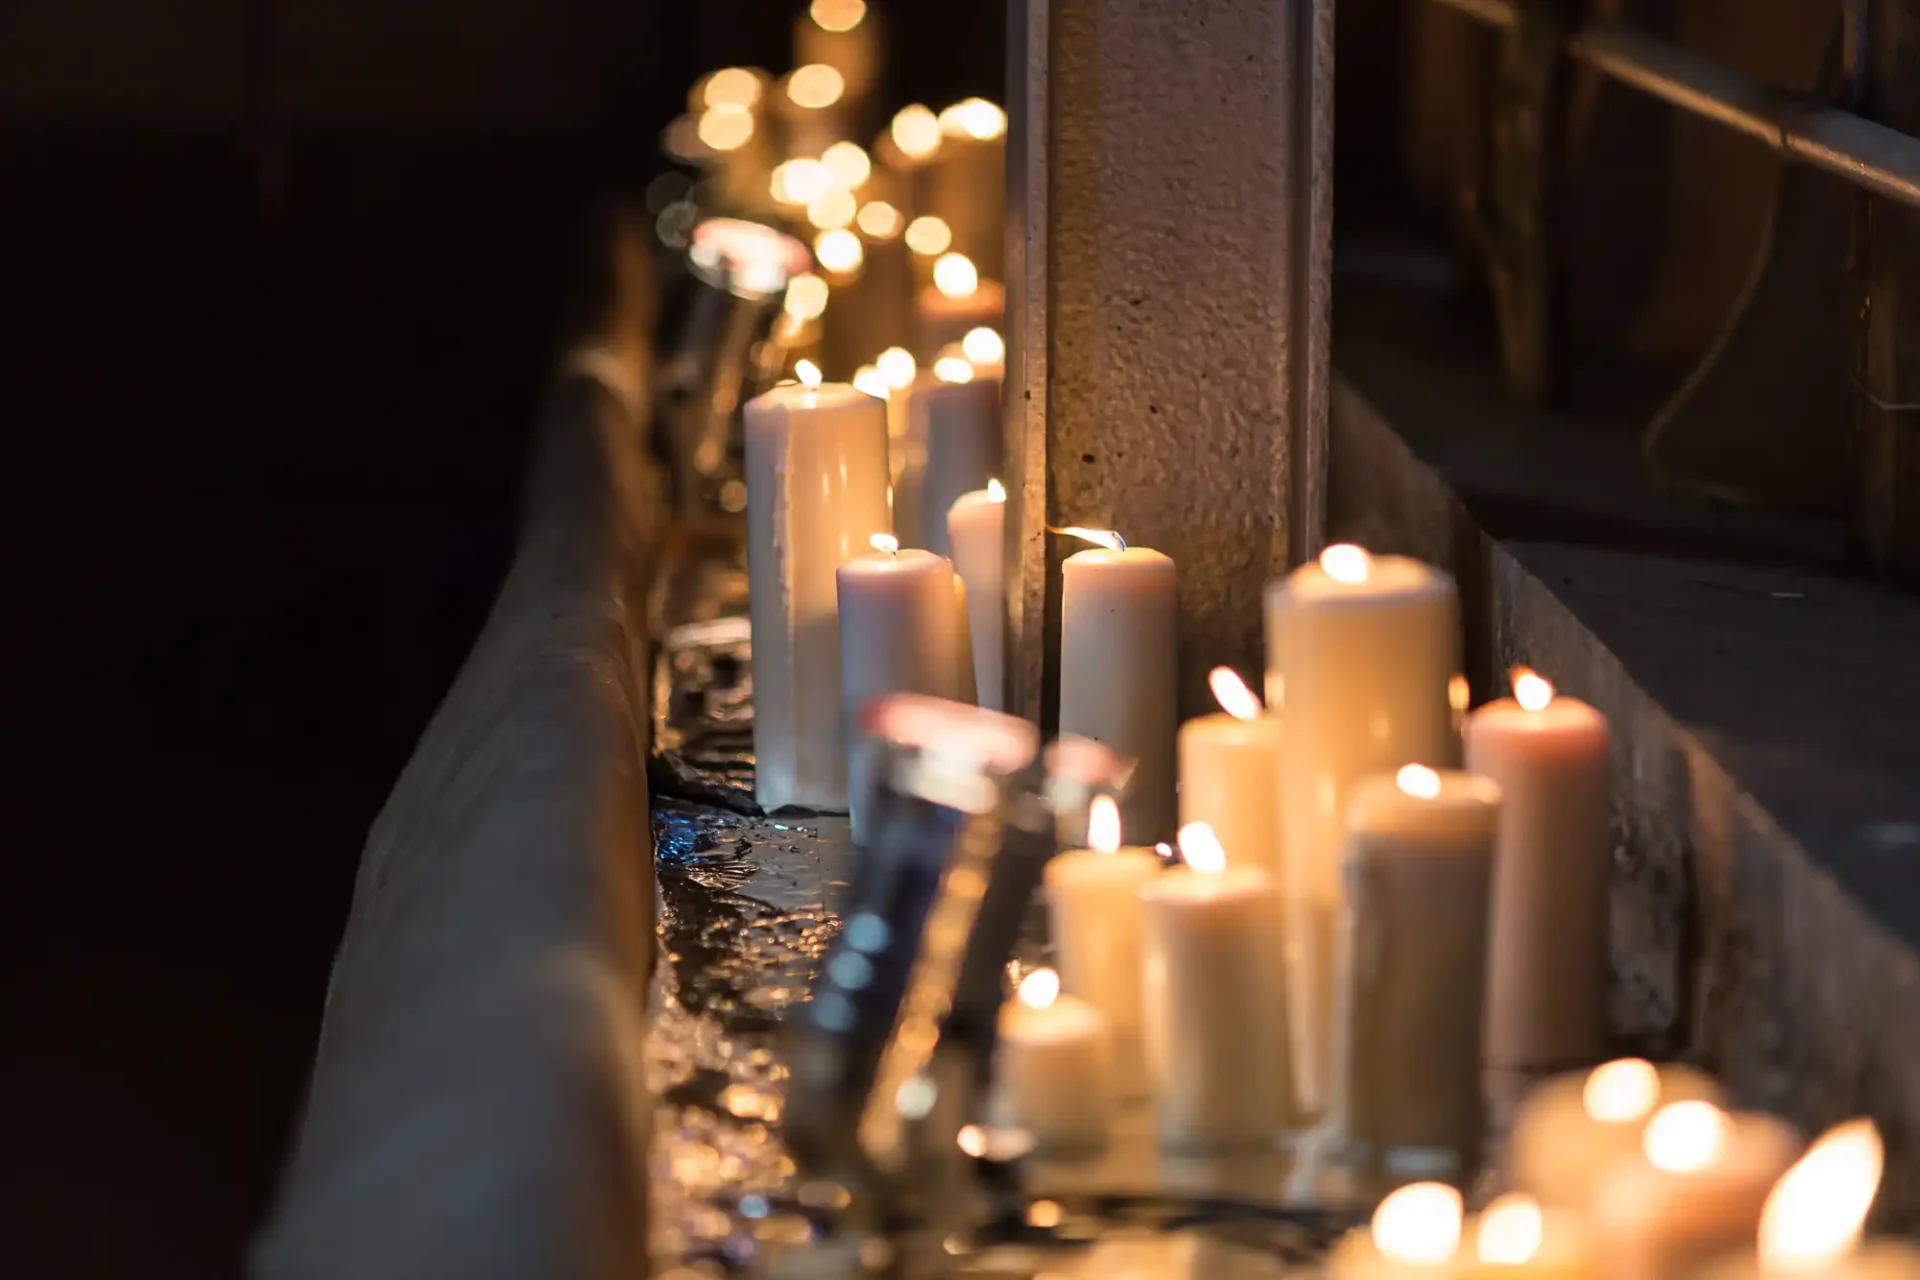 Candles with flickering flames lined up along a narrow ledge, casting a warm glow on the surrounding area.